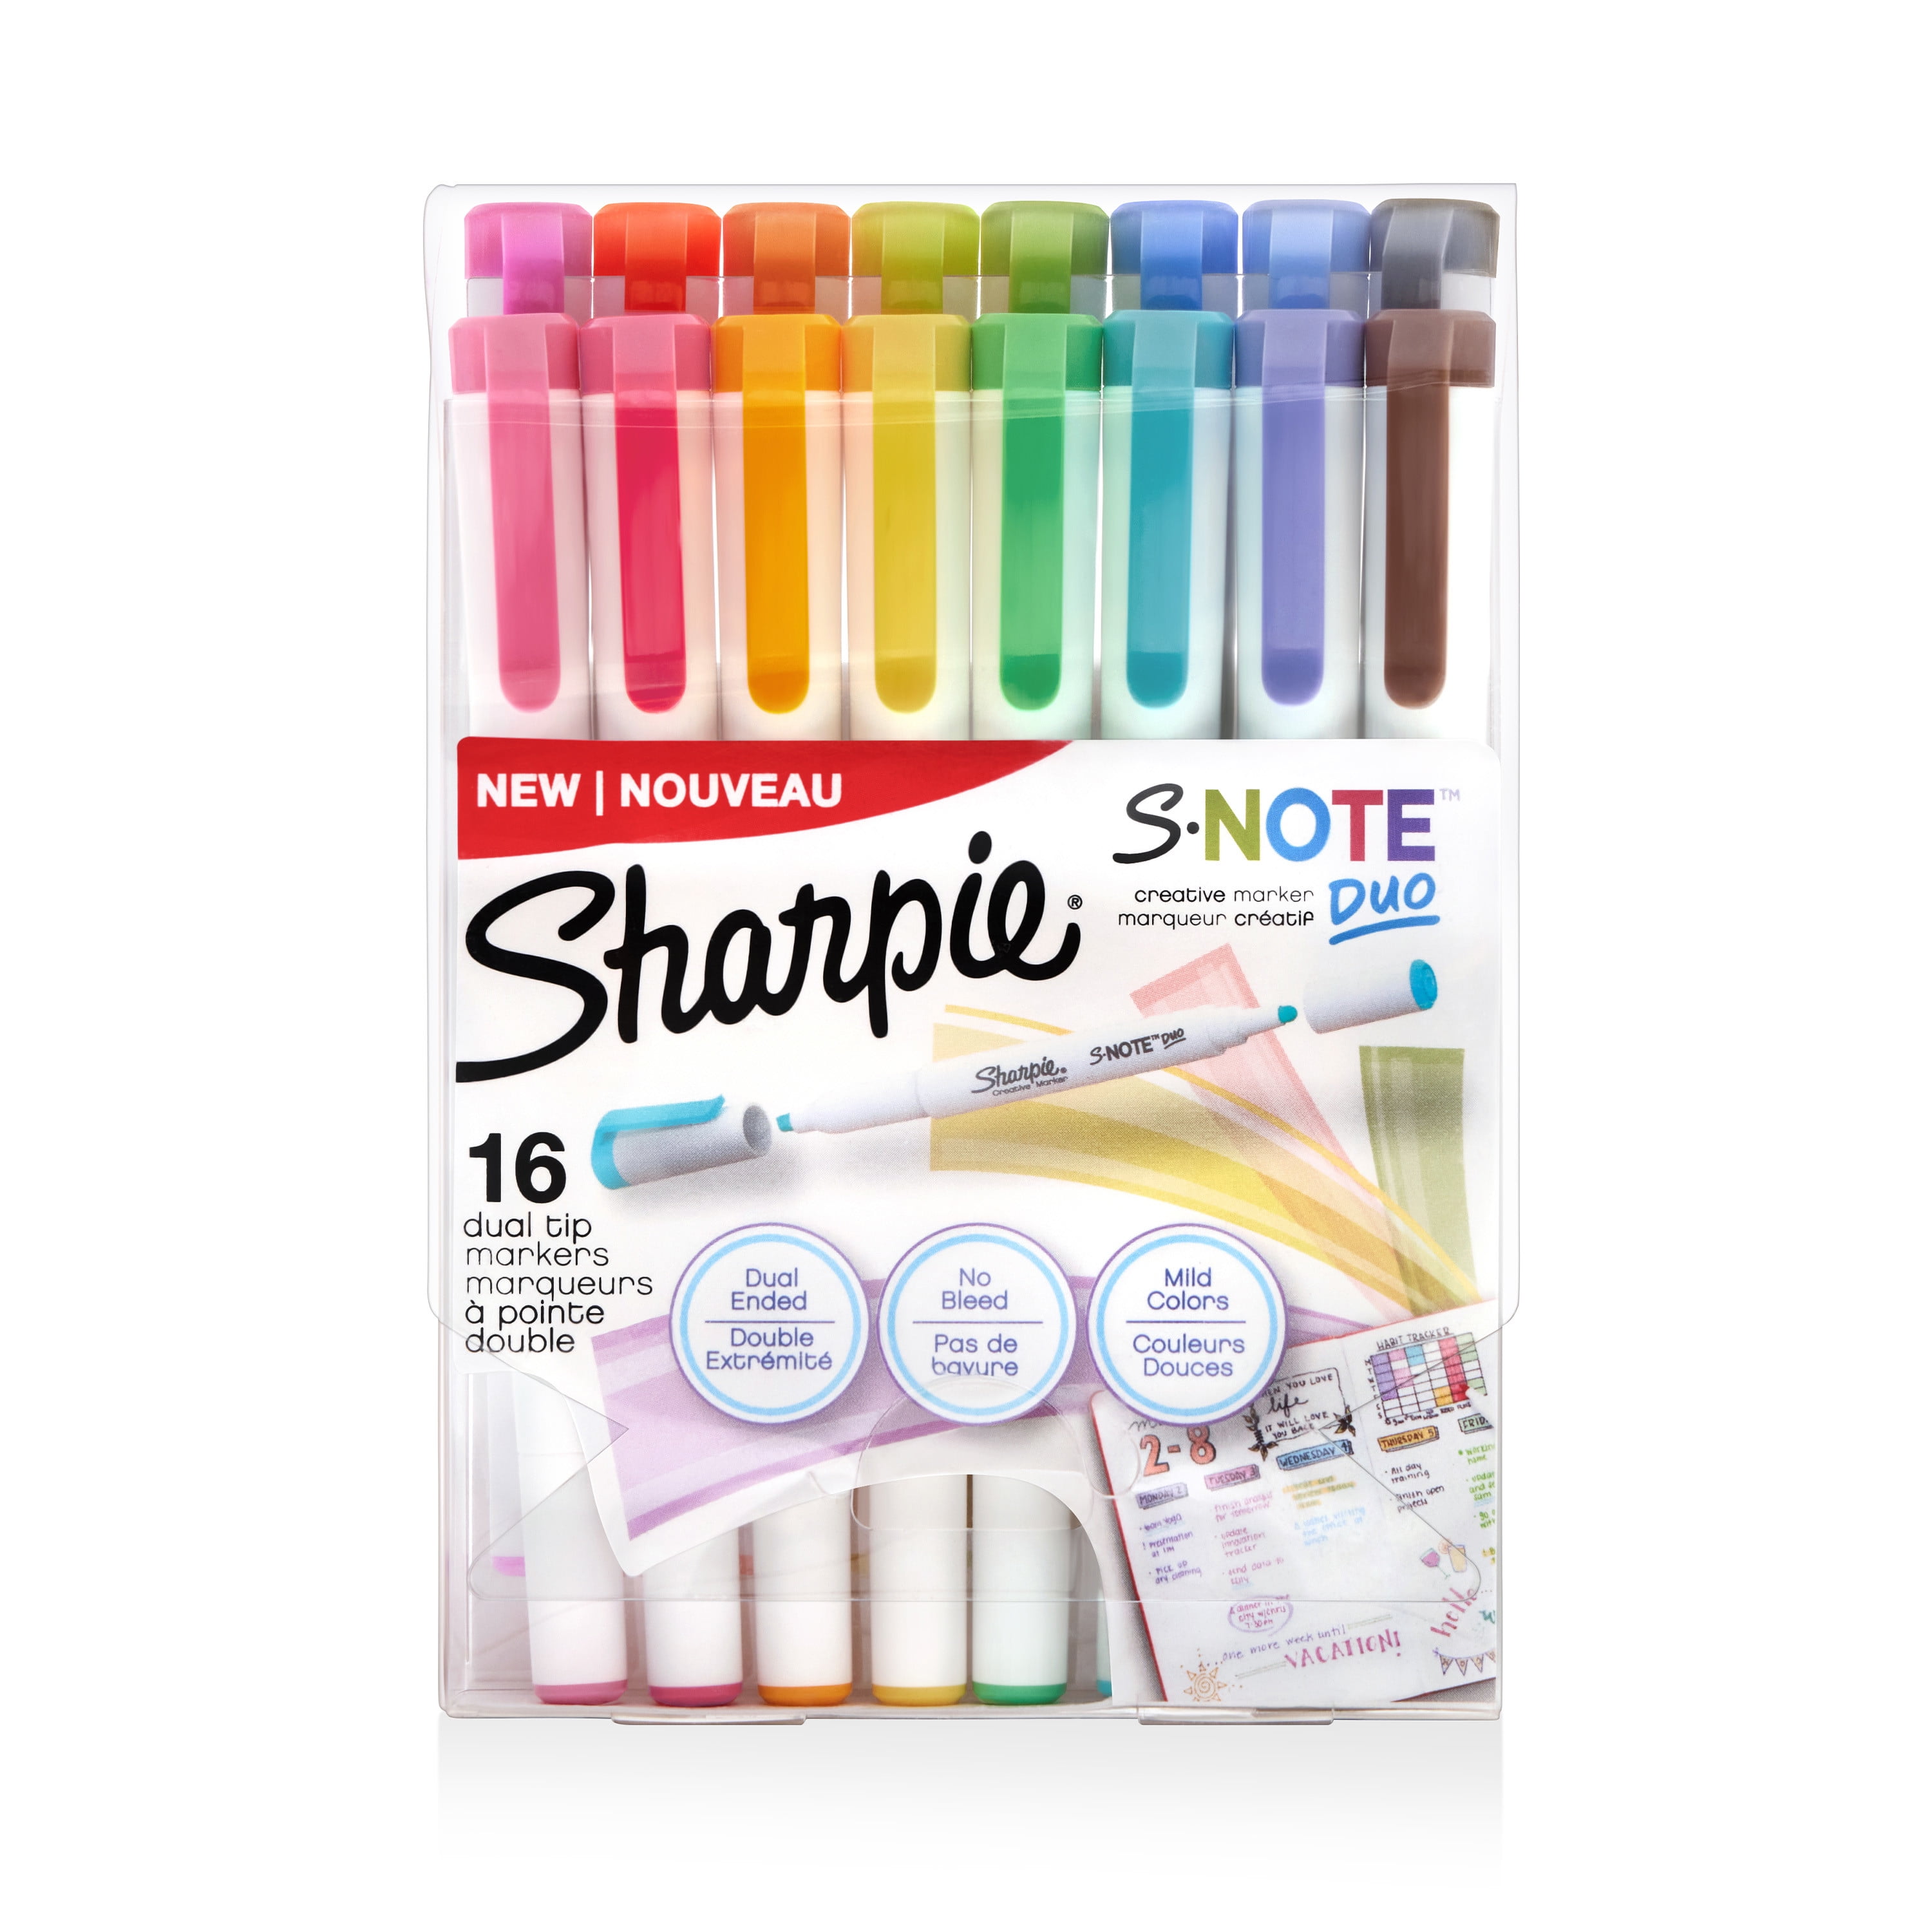 Sharpie S-Note Duo Dual-Ended Creative, Assorted Colors, Fine & Chisel Tips, 16-Ct